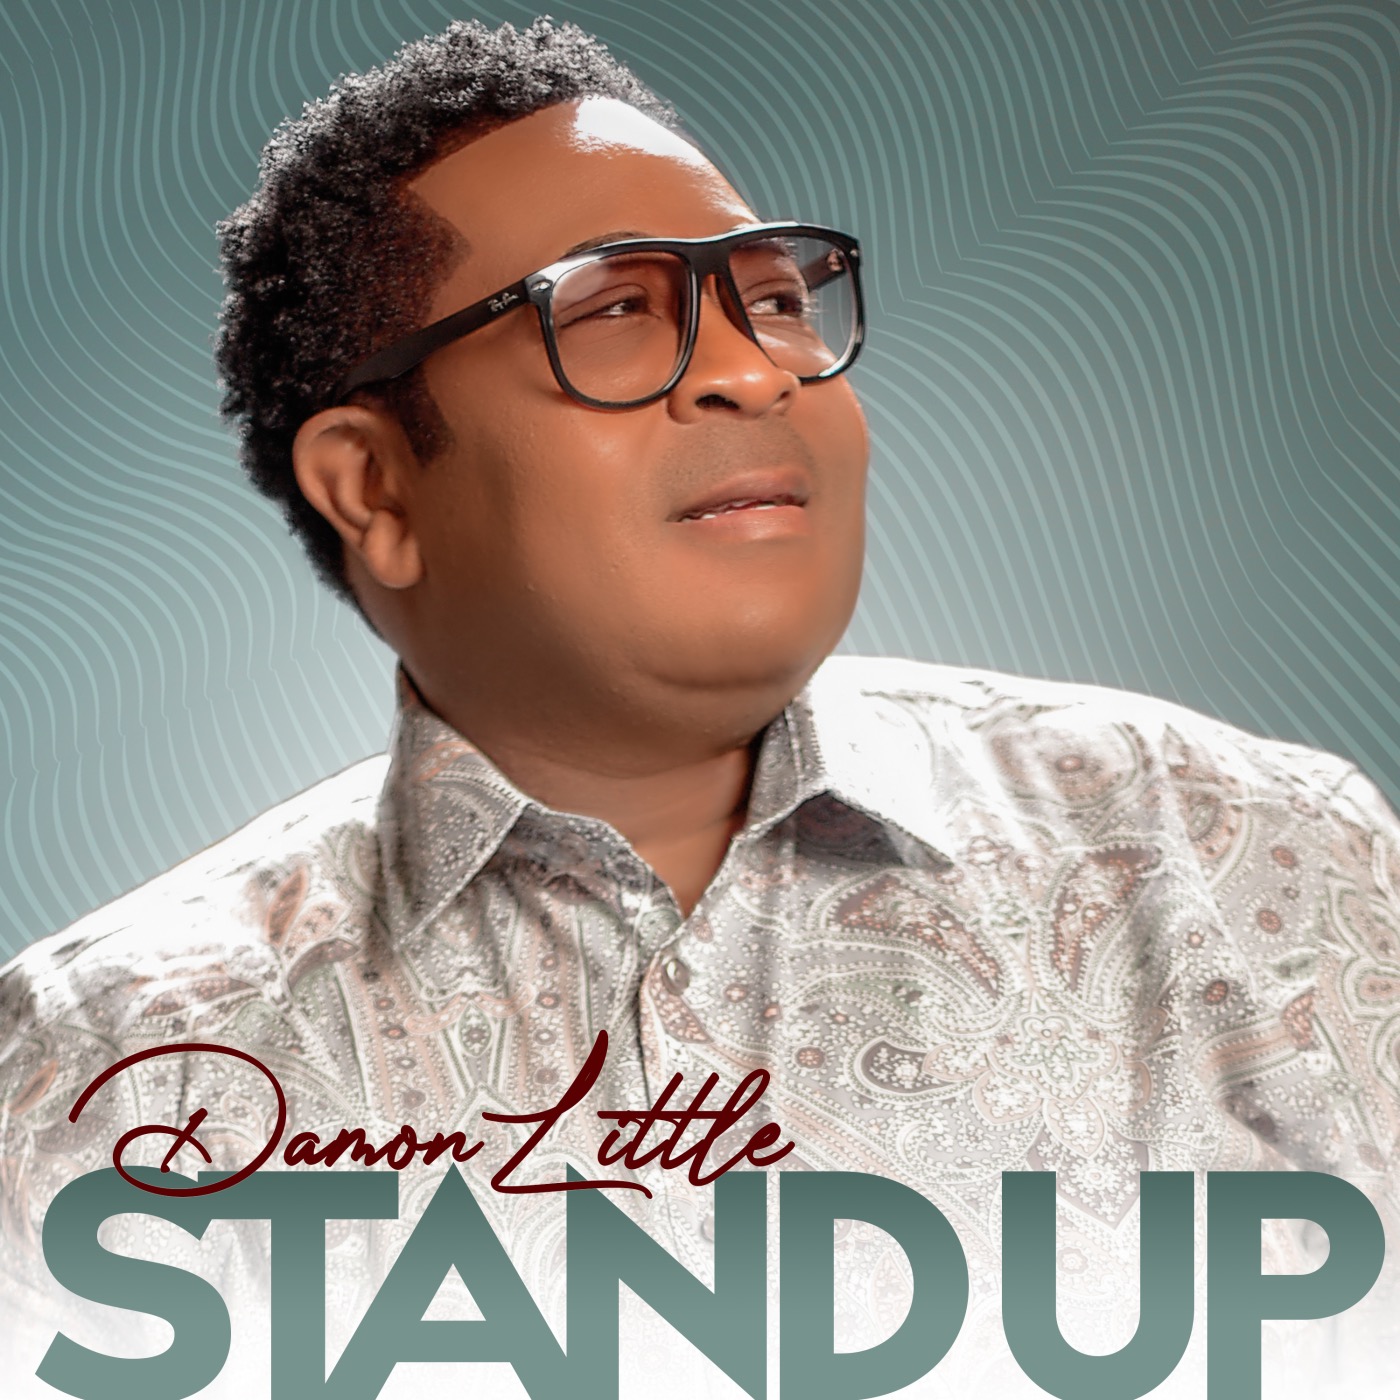 Art for Stand Up by Damon Little